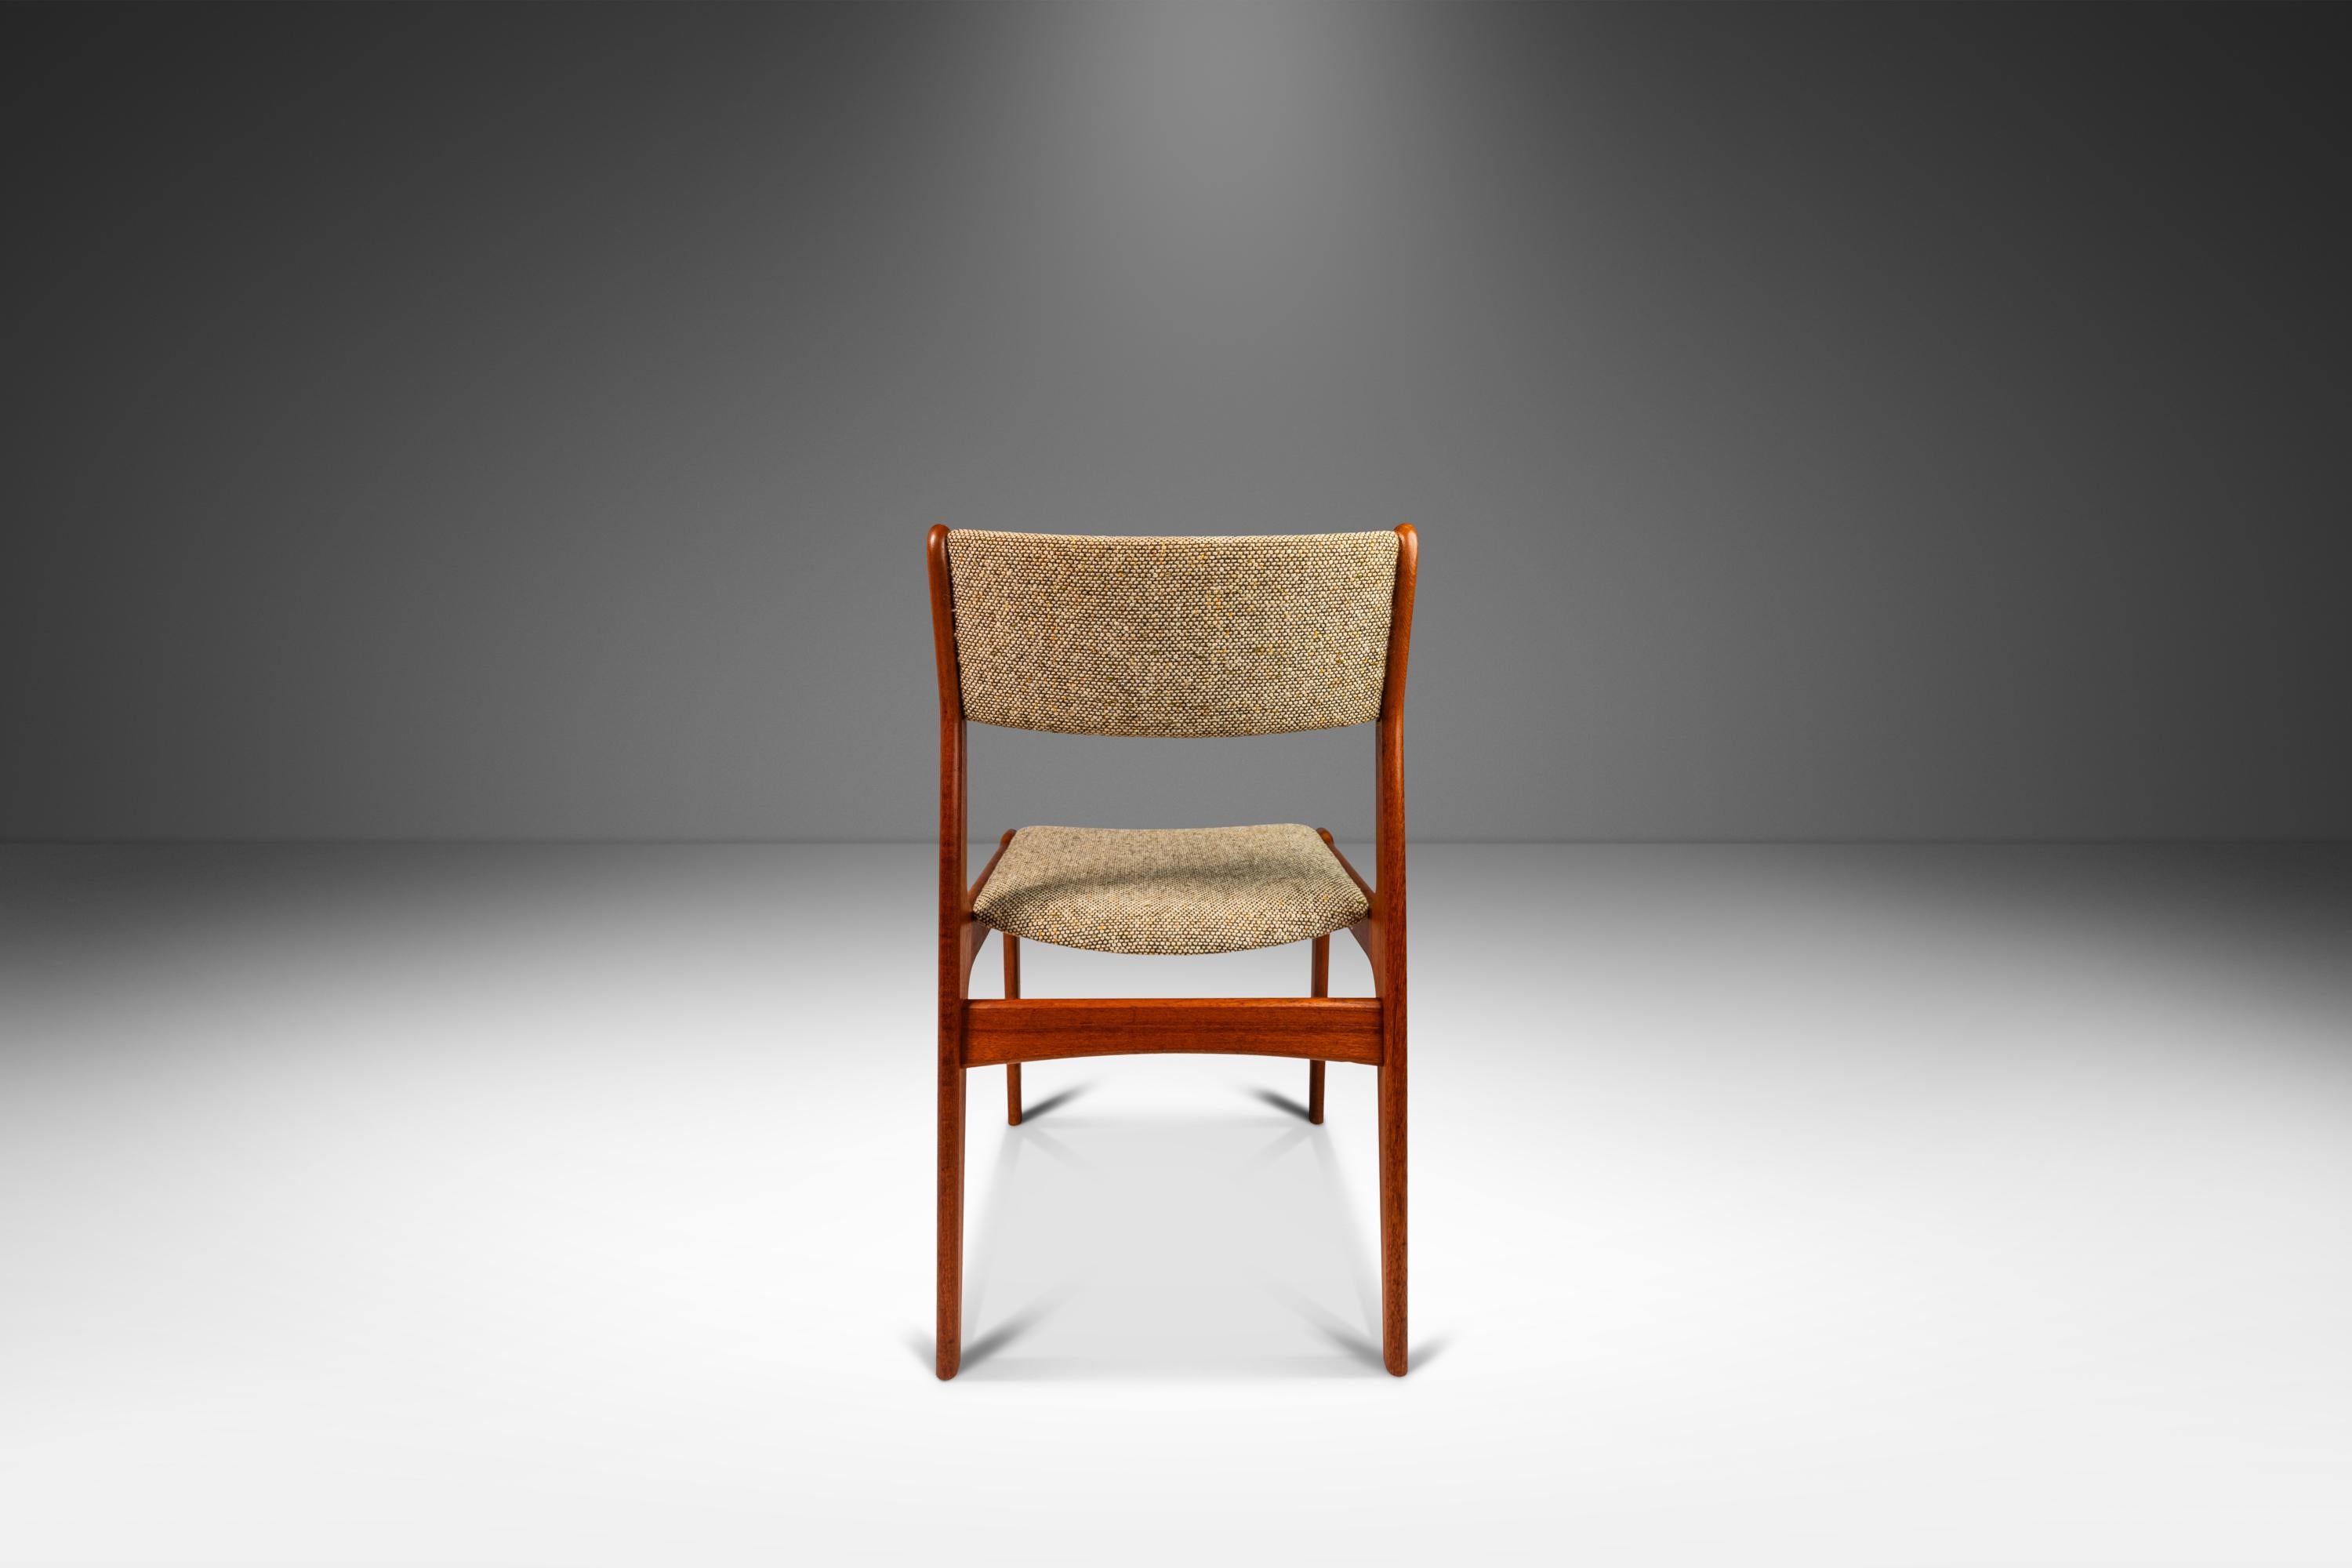 Singaporean Set of 4 Danish Teak Dining Chairs by D-SCAN, Original Fabric, c. 1970s For Sale